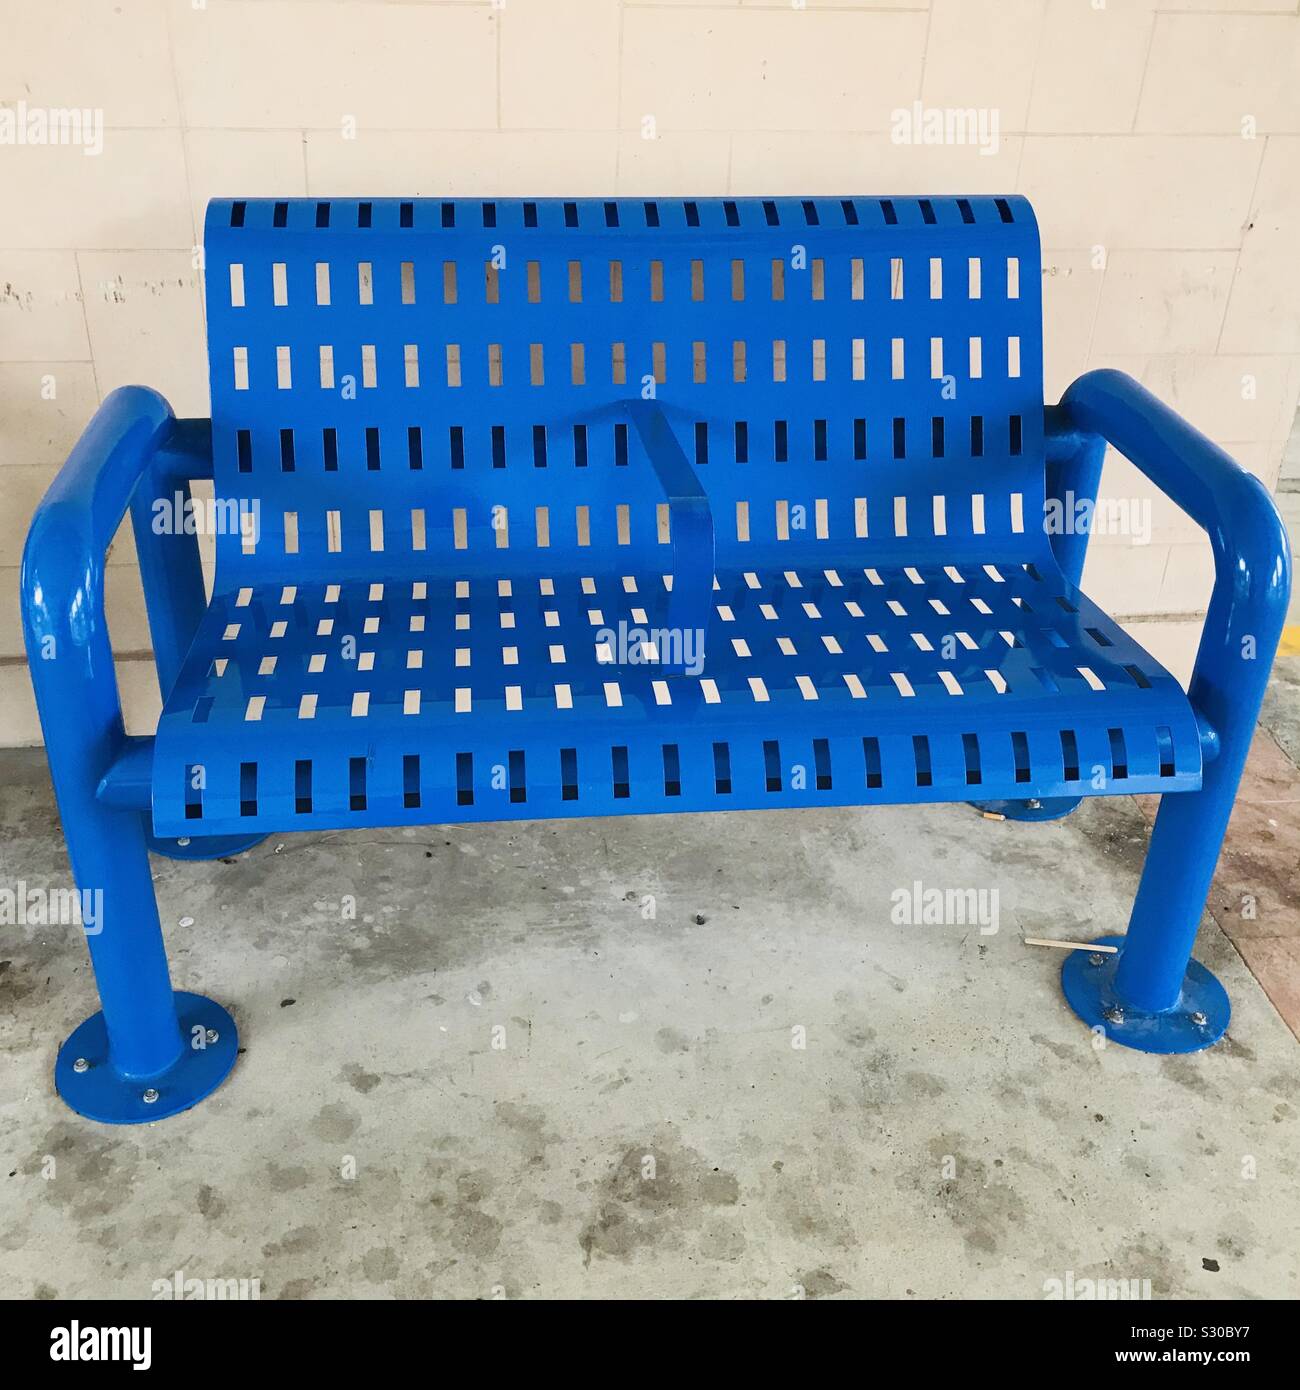 Metal bench Ina public place with fluorescent blue colour, resting area void deck Stock Photo